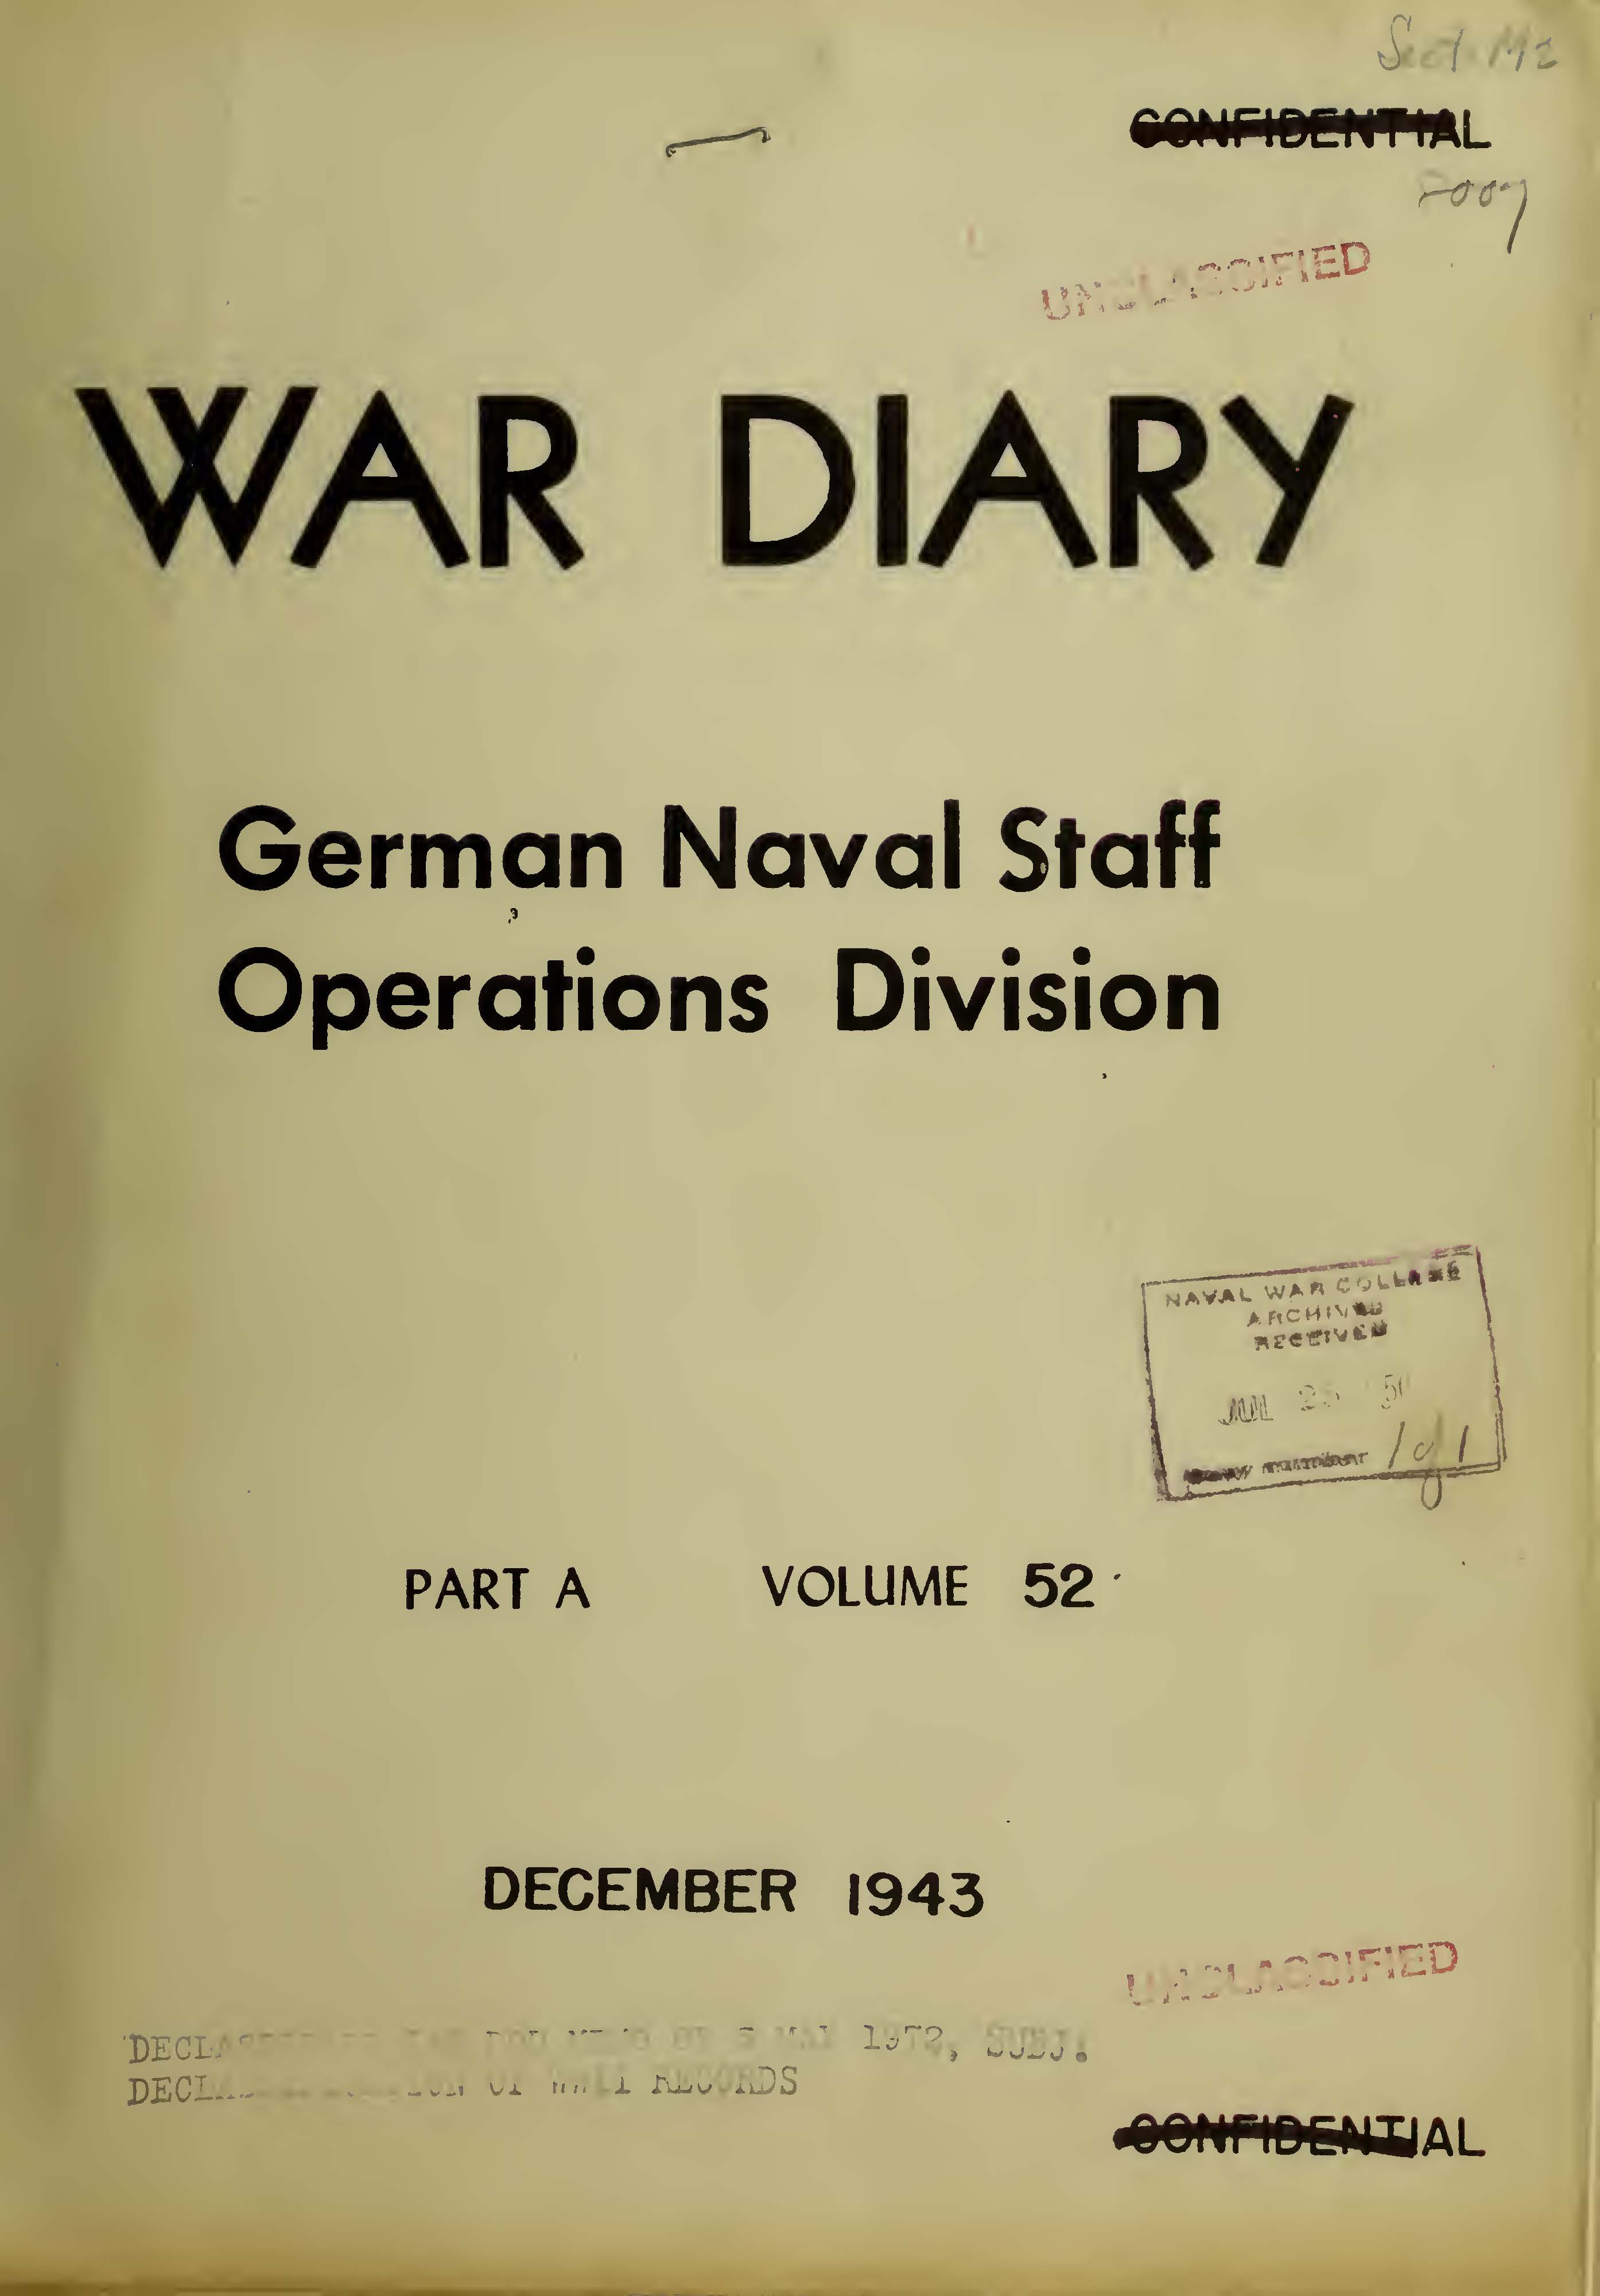 War Diary of German Naval Staff (Operations Division) Part A, Volume 52, December 1943